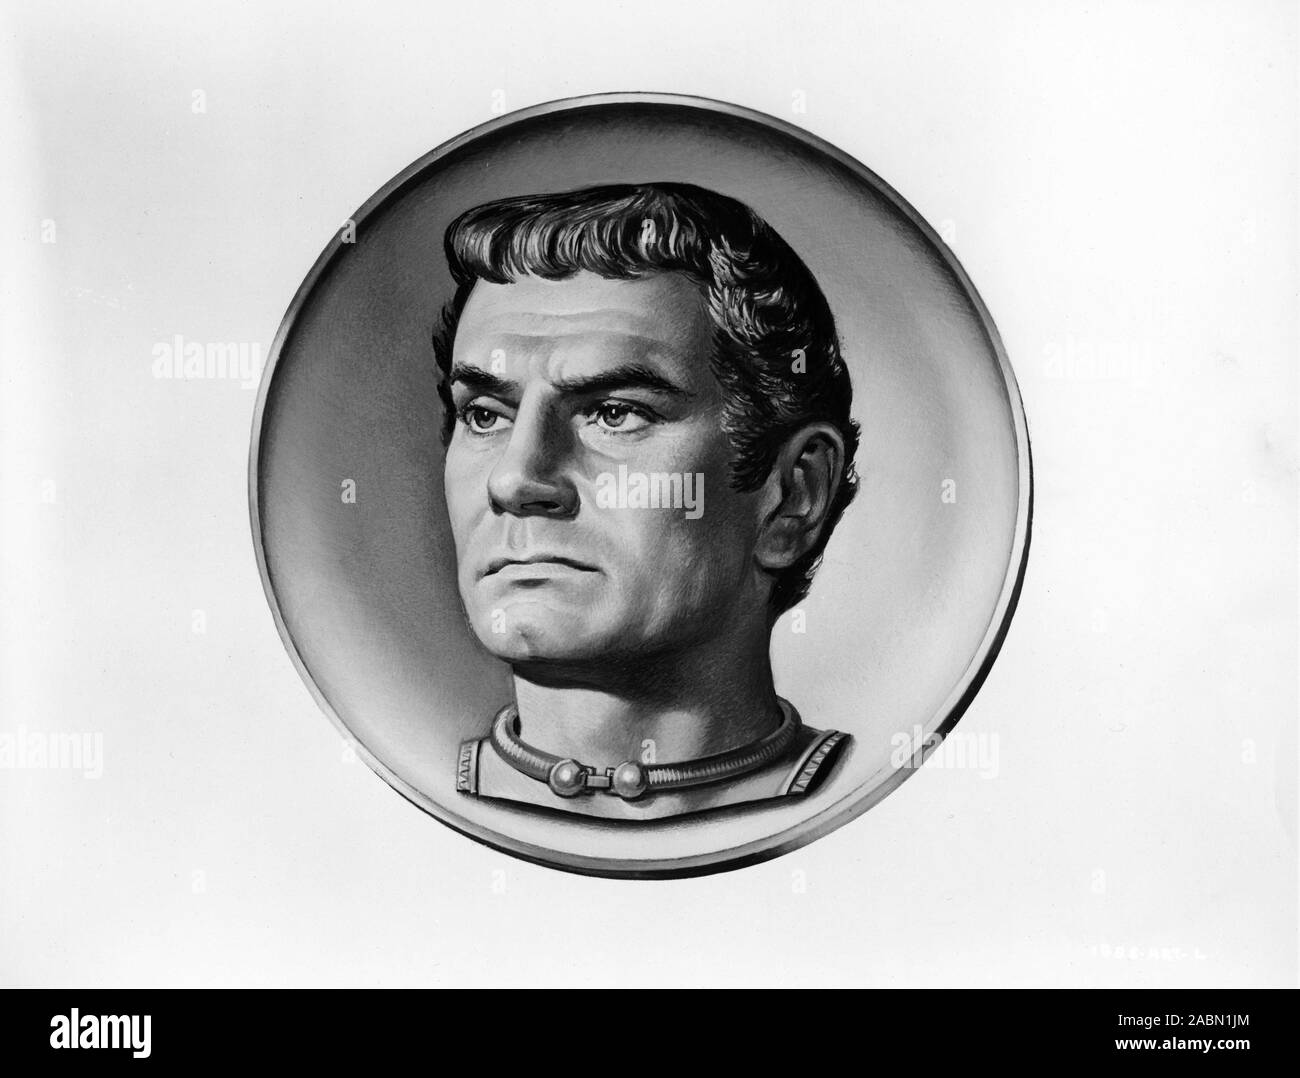 LAURENCE OLIVIER Portrait as Crassus Advertising Promotional Artwork for SPARTACUS 1960 director STANLEY KUBRICK novel Howard Fast screenplay Dalton Trumbo executive producer Kirk Douglas Bryna productions / Universal pictures Stock Photo